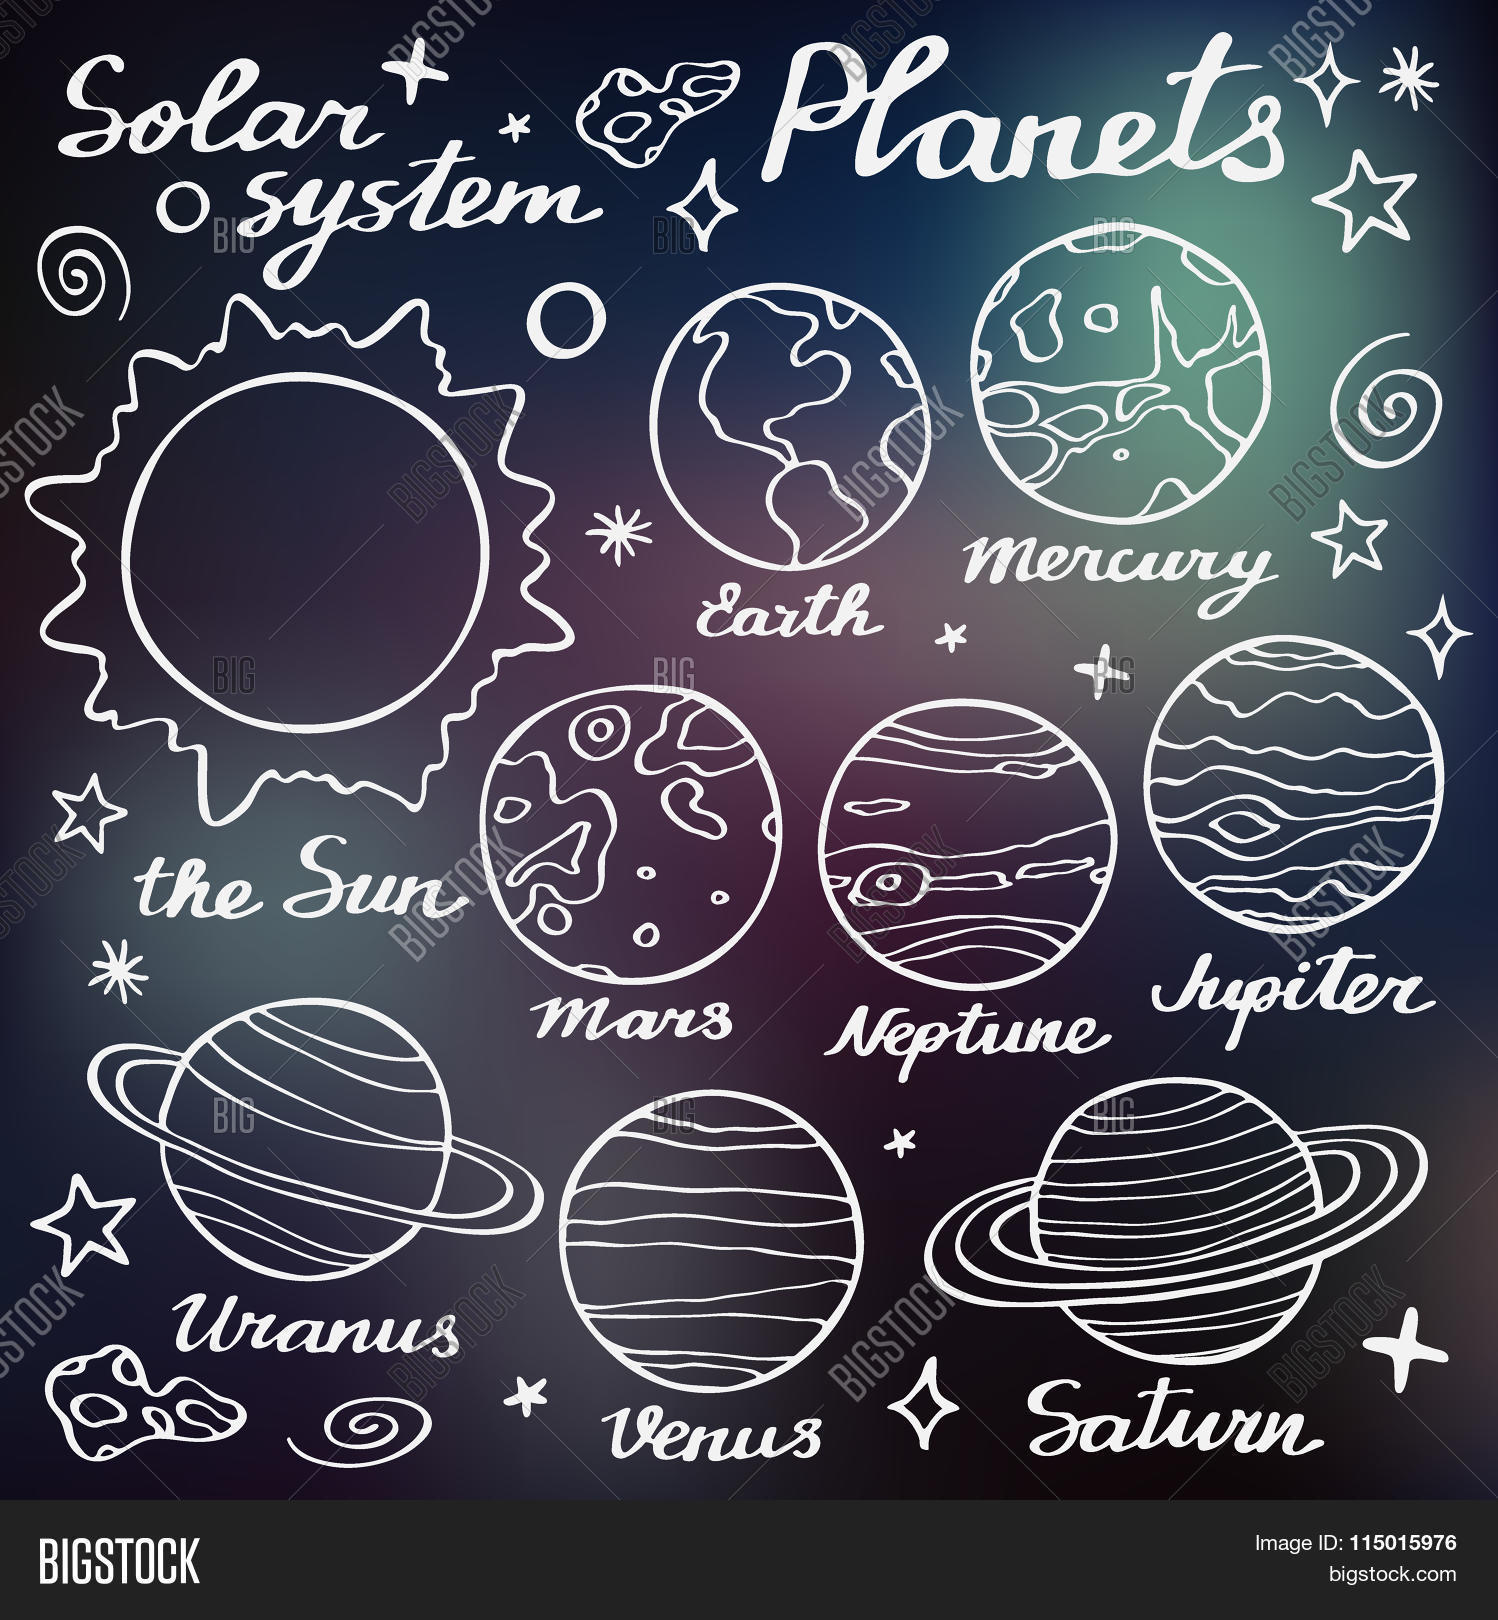 Solar System Drawing at GetDrawings Free download